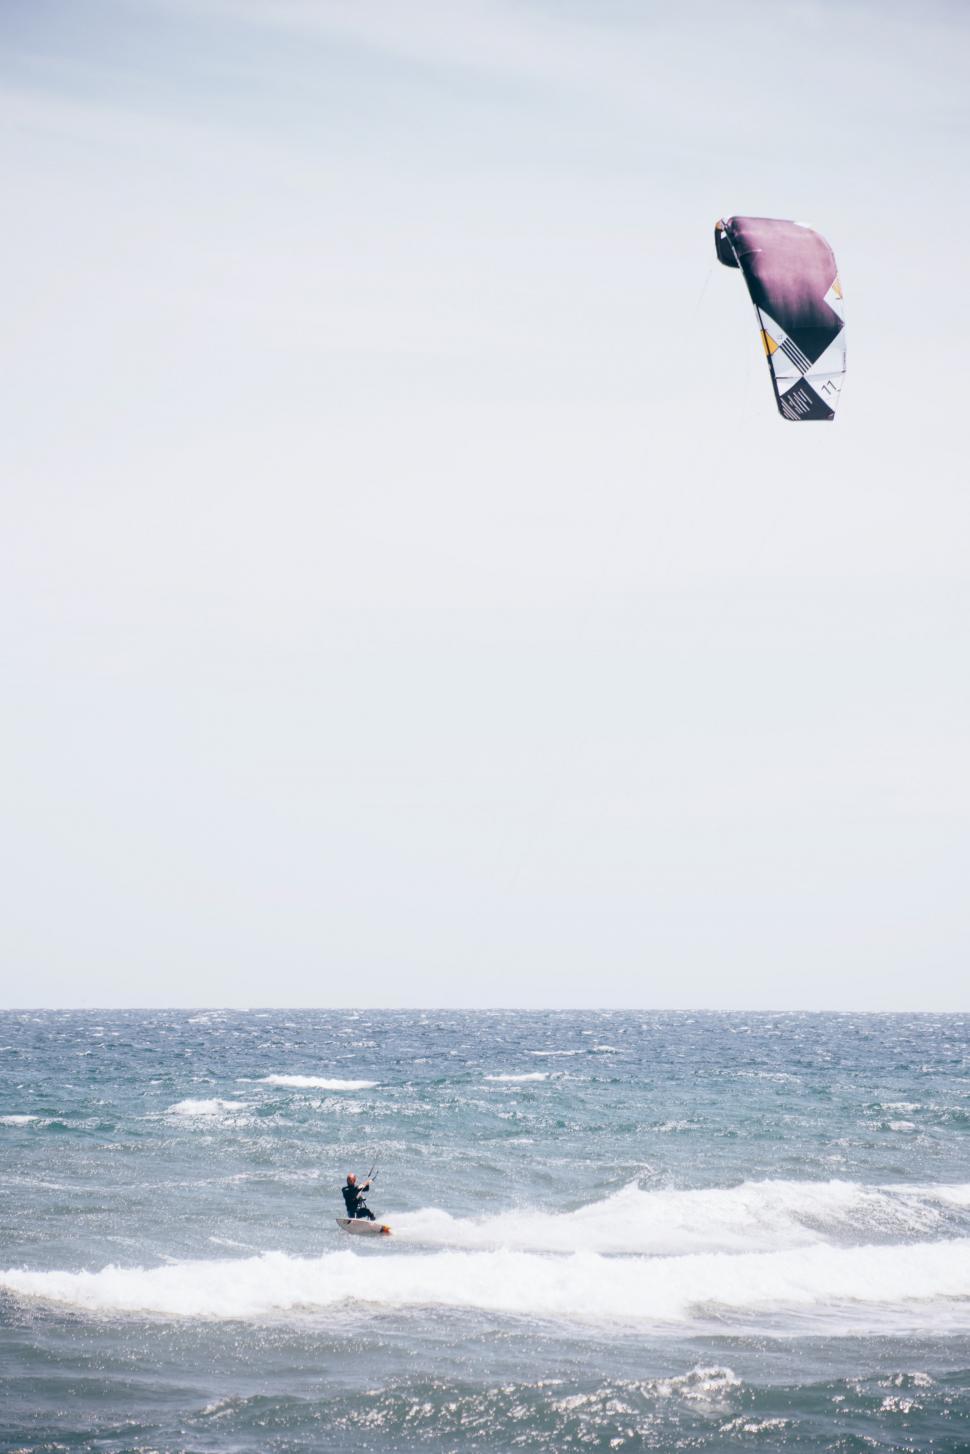 Free Image of Surfboarding with surfing kite 